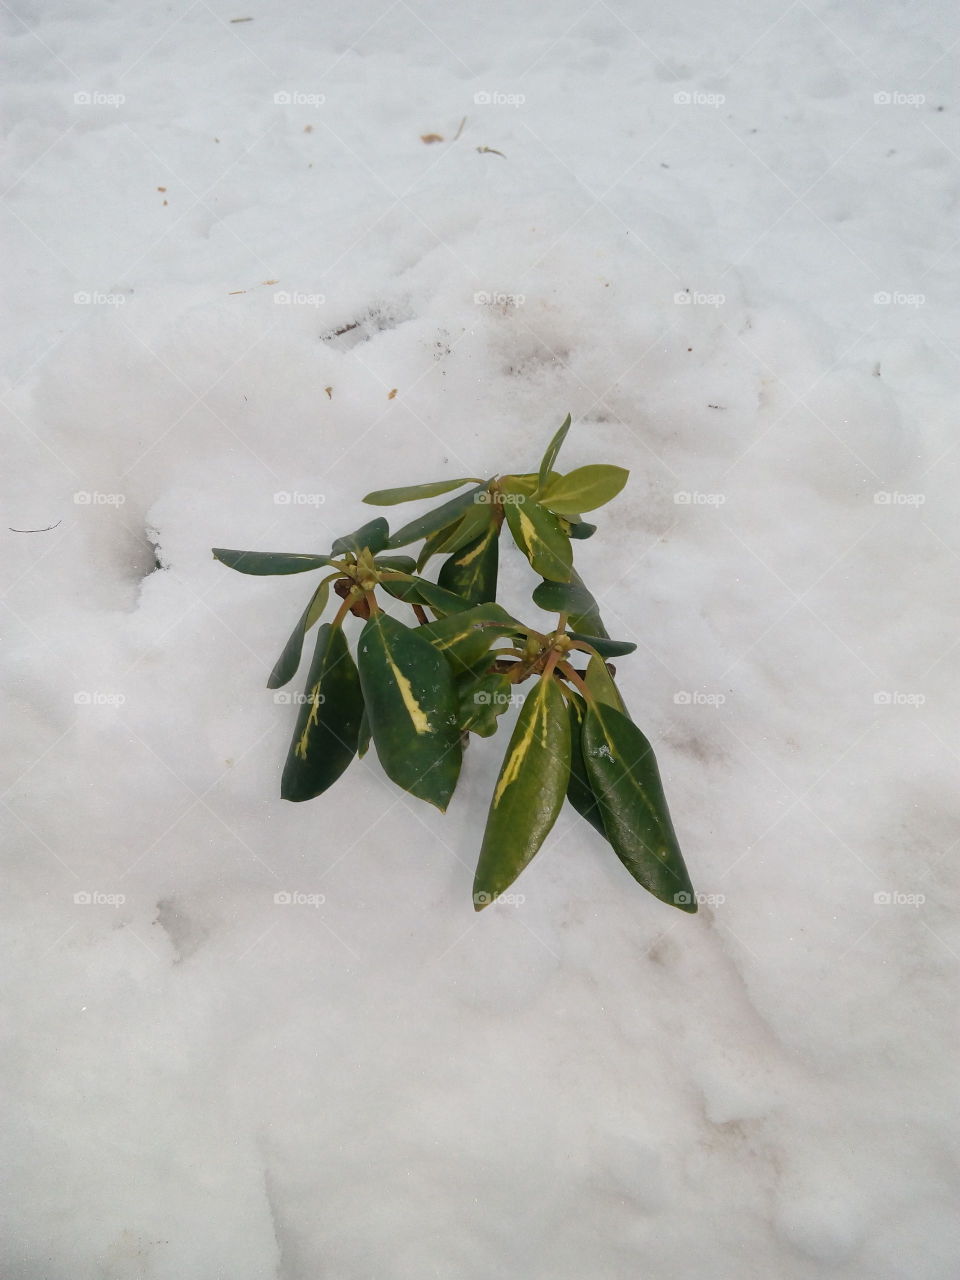 Rhododendron bush in the snow